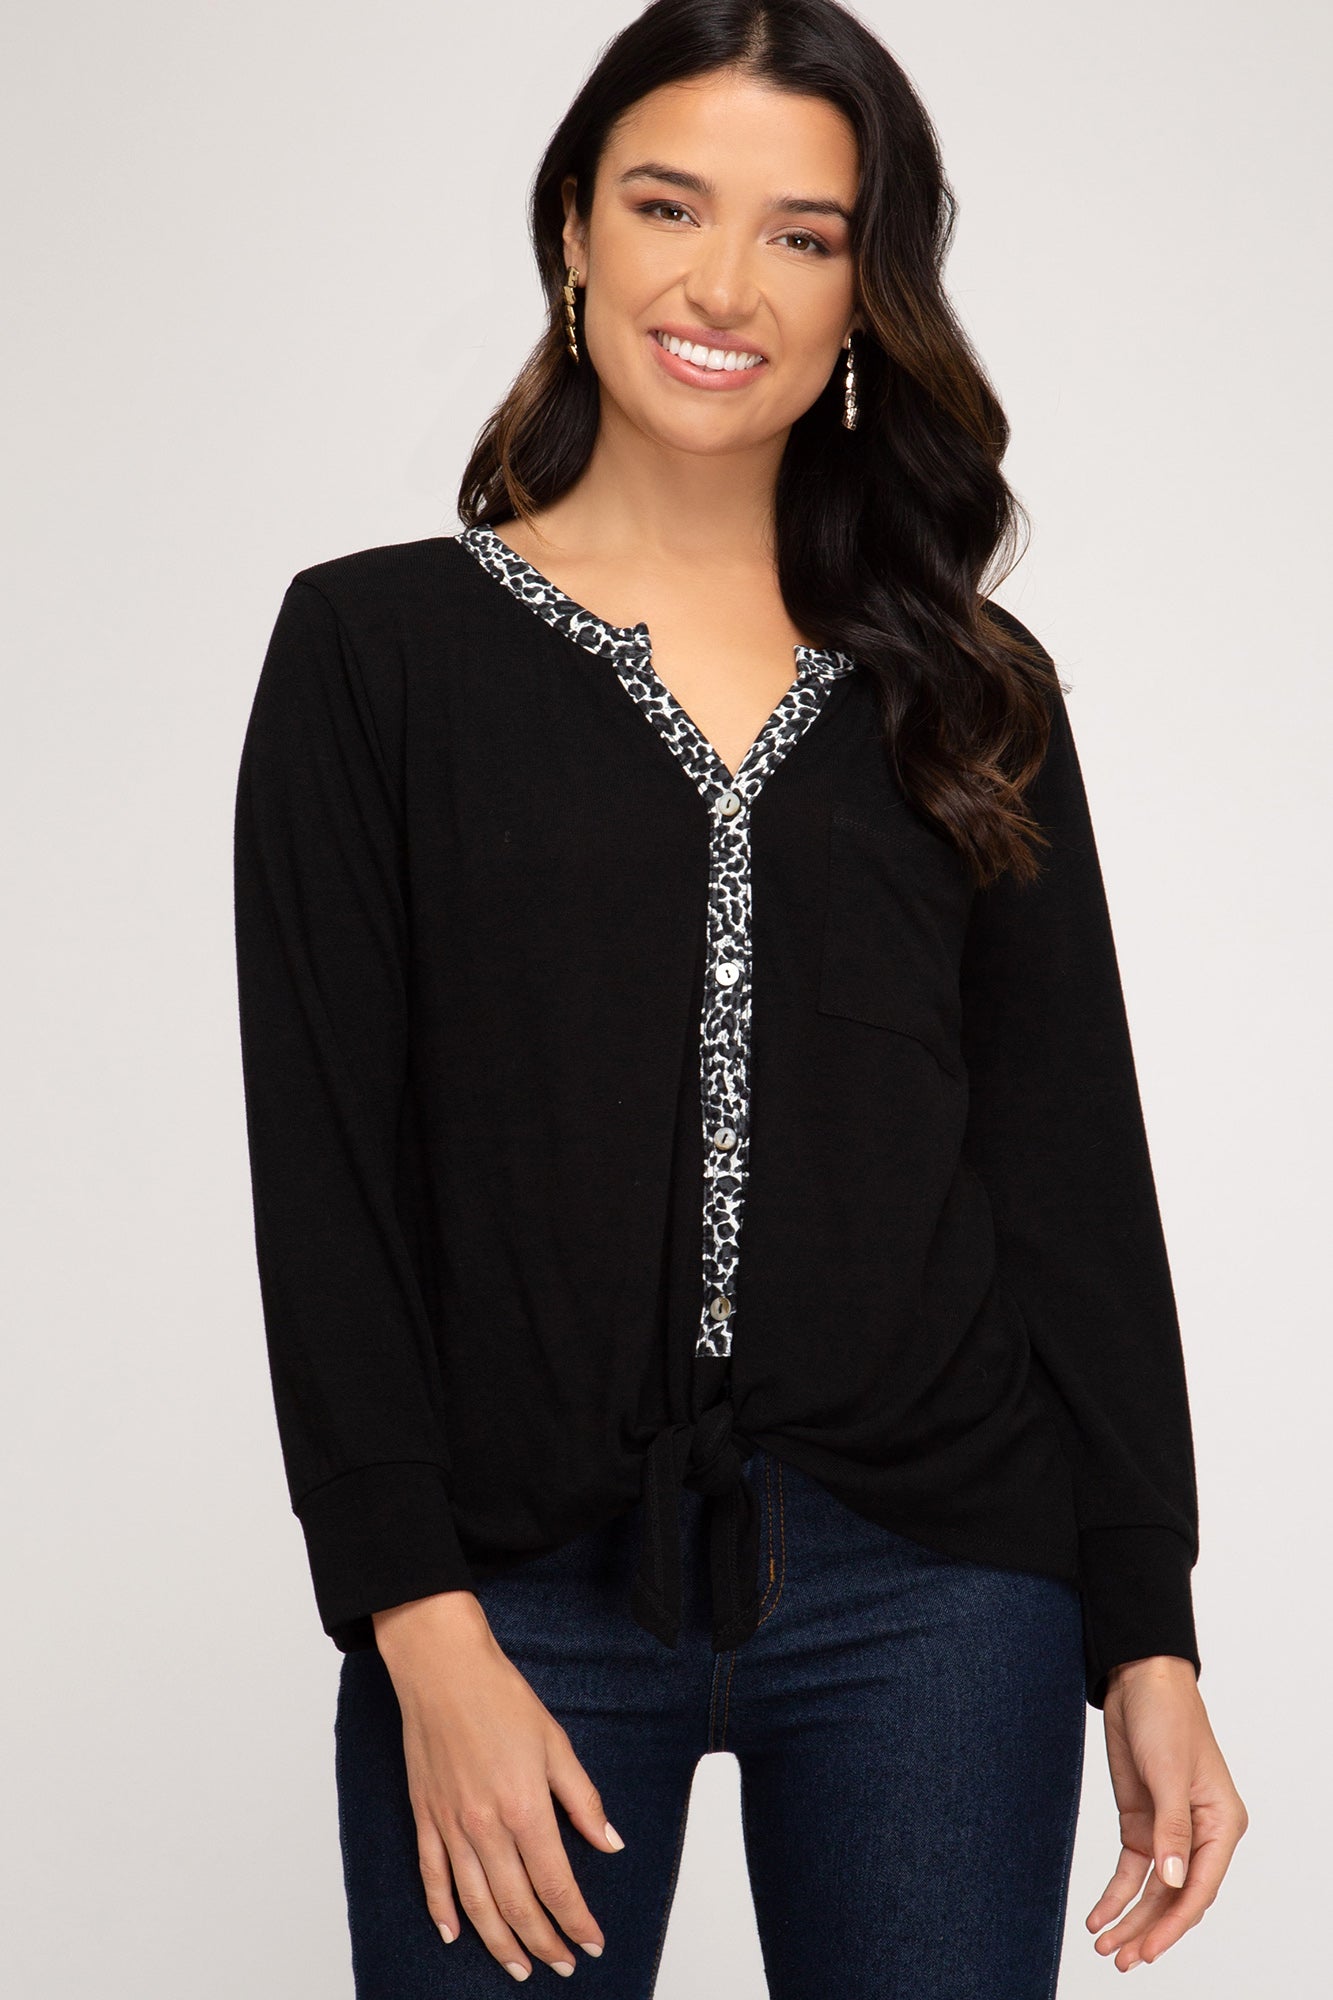 Long Sleeve Button Down Knit Top With Contrast Leopard Print Trim!